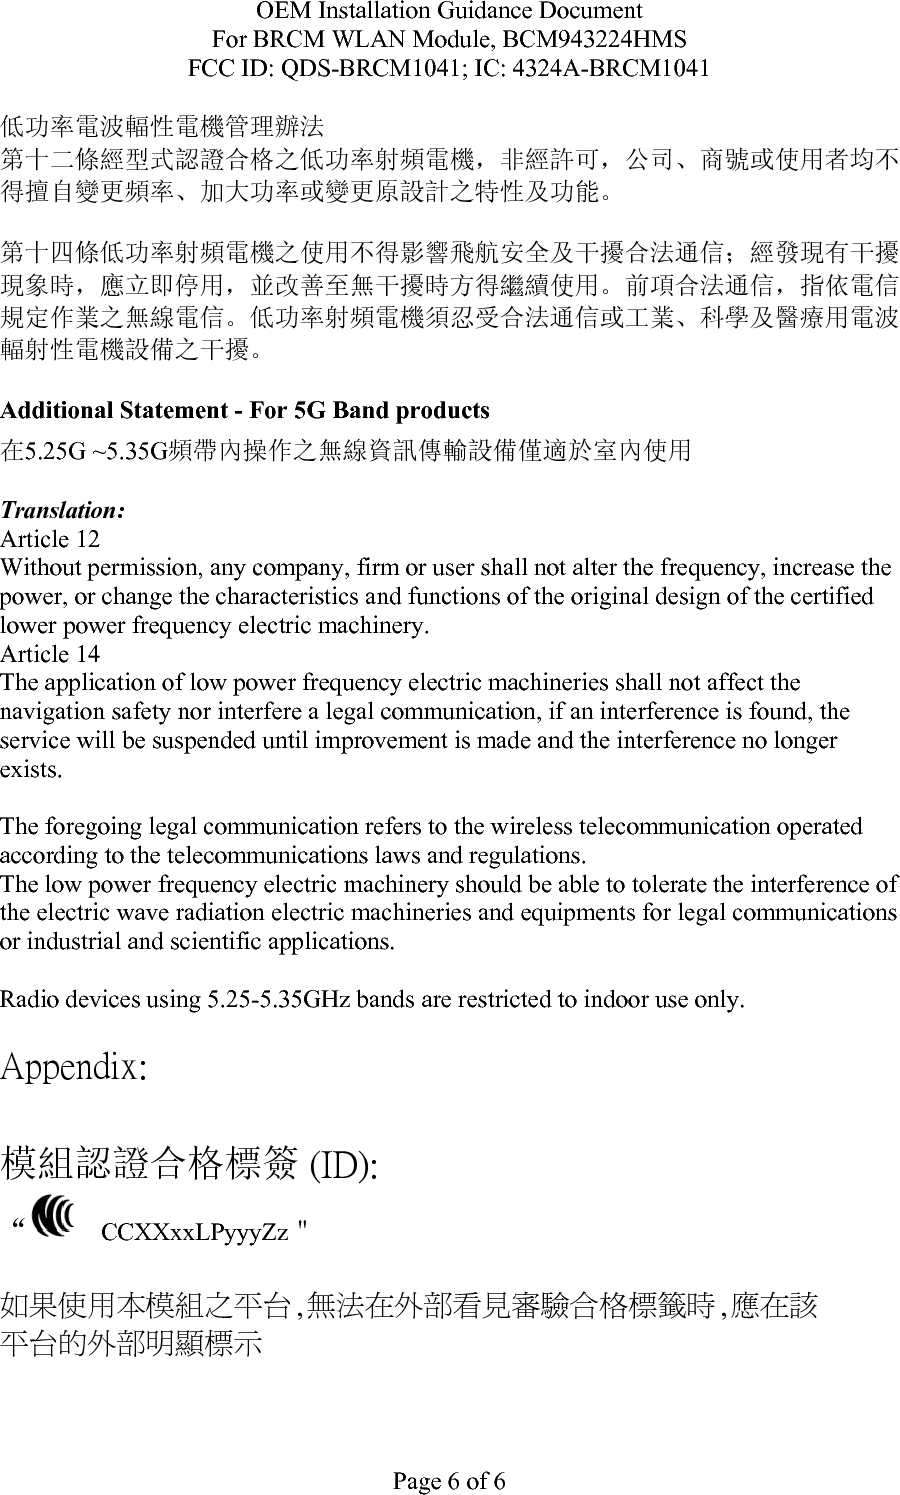 OEM Installation Guidance Document For BRCM WLAN Module, BCM943224HMS FCC ID: QDS-BRCM1041; IC: 4324A-BRCM1041  Page 7 of 7 “內含射頻模組   CCXXxxLPyyyZz” .  5. Korea  Include the following statement either on the label or in the User Guide.   &quot;당해 무선설비가 전파혼신 가능성이 있으므로 인명안전과 관련된 서비스는 할 수 없음&quot;   6. Argentina   The current approval is in the name of Broadcom’s local representative. It may be necessary to obtain regulatory approval in the name of the local distributor or importer. We suggest manufacturers check with their local distributors and importers in Argentina.  7. Brazil - Anatel   Before using Broadcom Anatel approvals,   1.  PC- OEM must make arrangement for its local offices or distributors to provide maintenance, technical assistance or replace any faulty products sold in Brazil.   2.  All warranty services will be provided by the distributors or PC-OEM sales support in Brazil. An official agreement stating warranty responsibilities must be signed and made available to Broadcom.   Interference statement to be included in the Users Guide &quot;Este equipamento opera em caráter secundário, isto é, não tem direito a proteção contra interferência prejudicial, mesmo de estações do mesmo tipo, e não pode causar interferência a sistemas operando em caráter primário.&quot; Translation:  &quot;This equipment operates in secondary character. It can be affected by harmful interference. However, it cannot cause interference to systems operating in primary character.&quot;    8. South Africa – ICASA  PC-OEMs must make arrangement for importers to supply spare parts and carry out repairs in South Africa.  